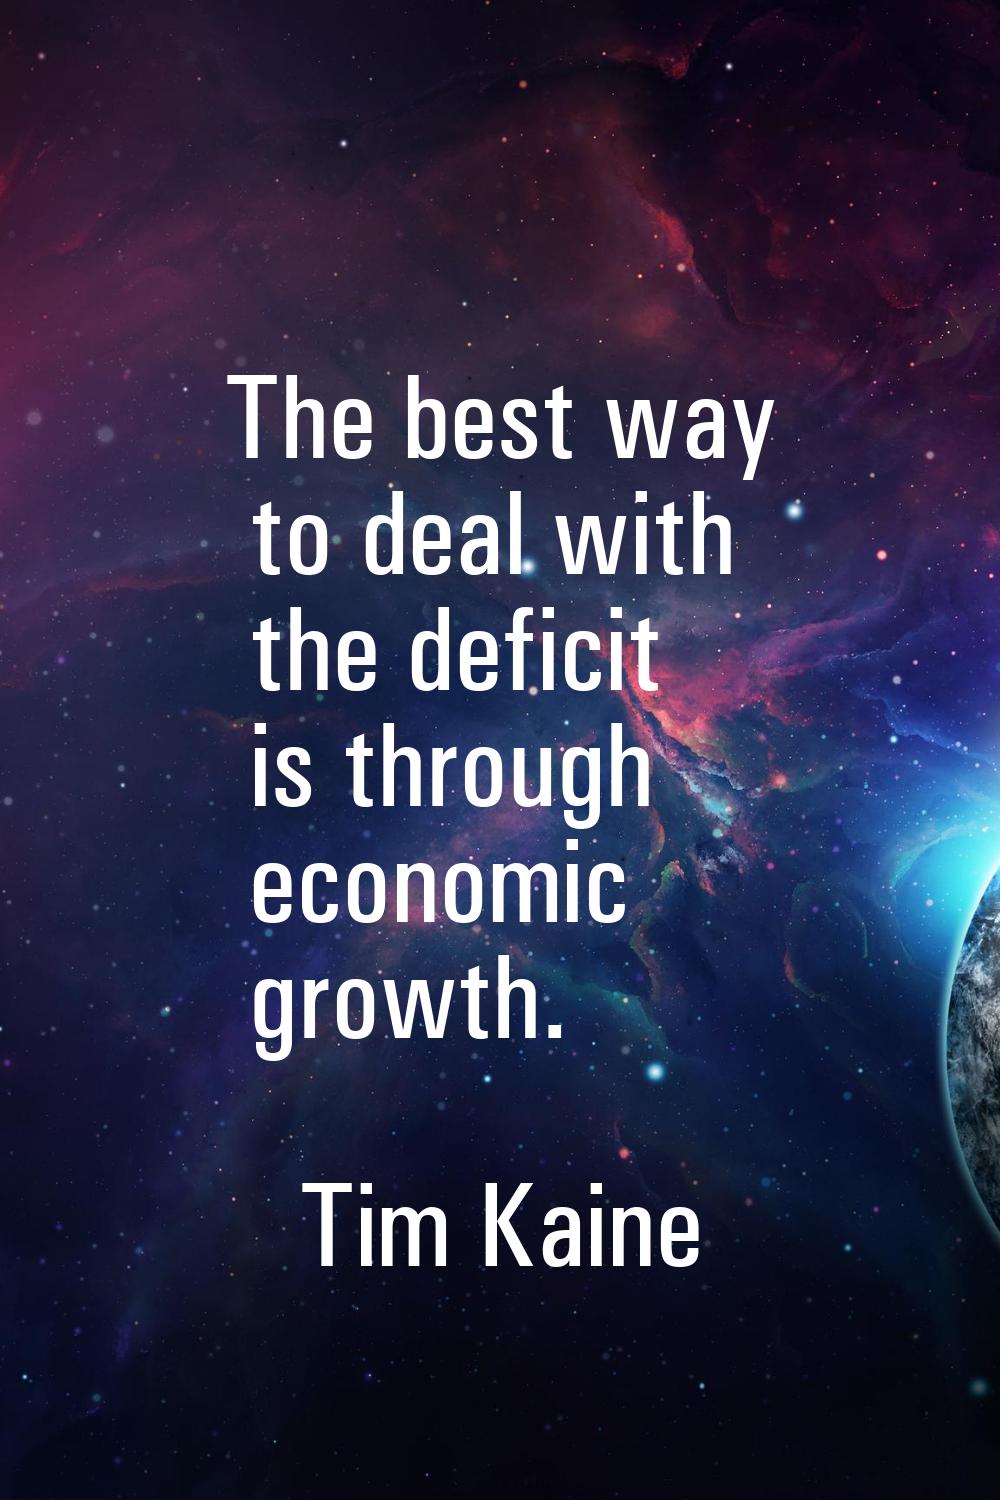 The best way to deal with the deficit is through economic growth.